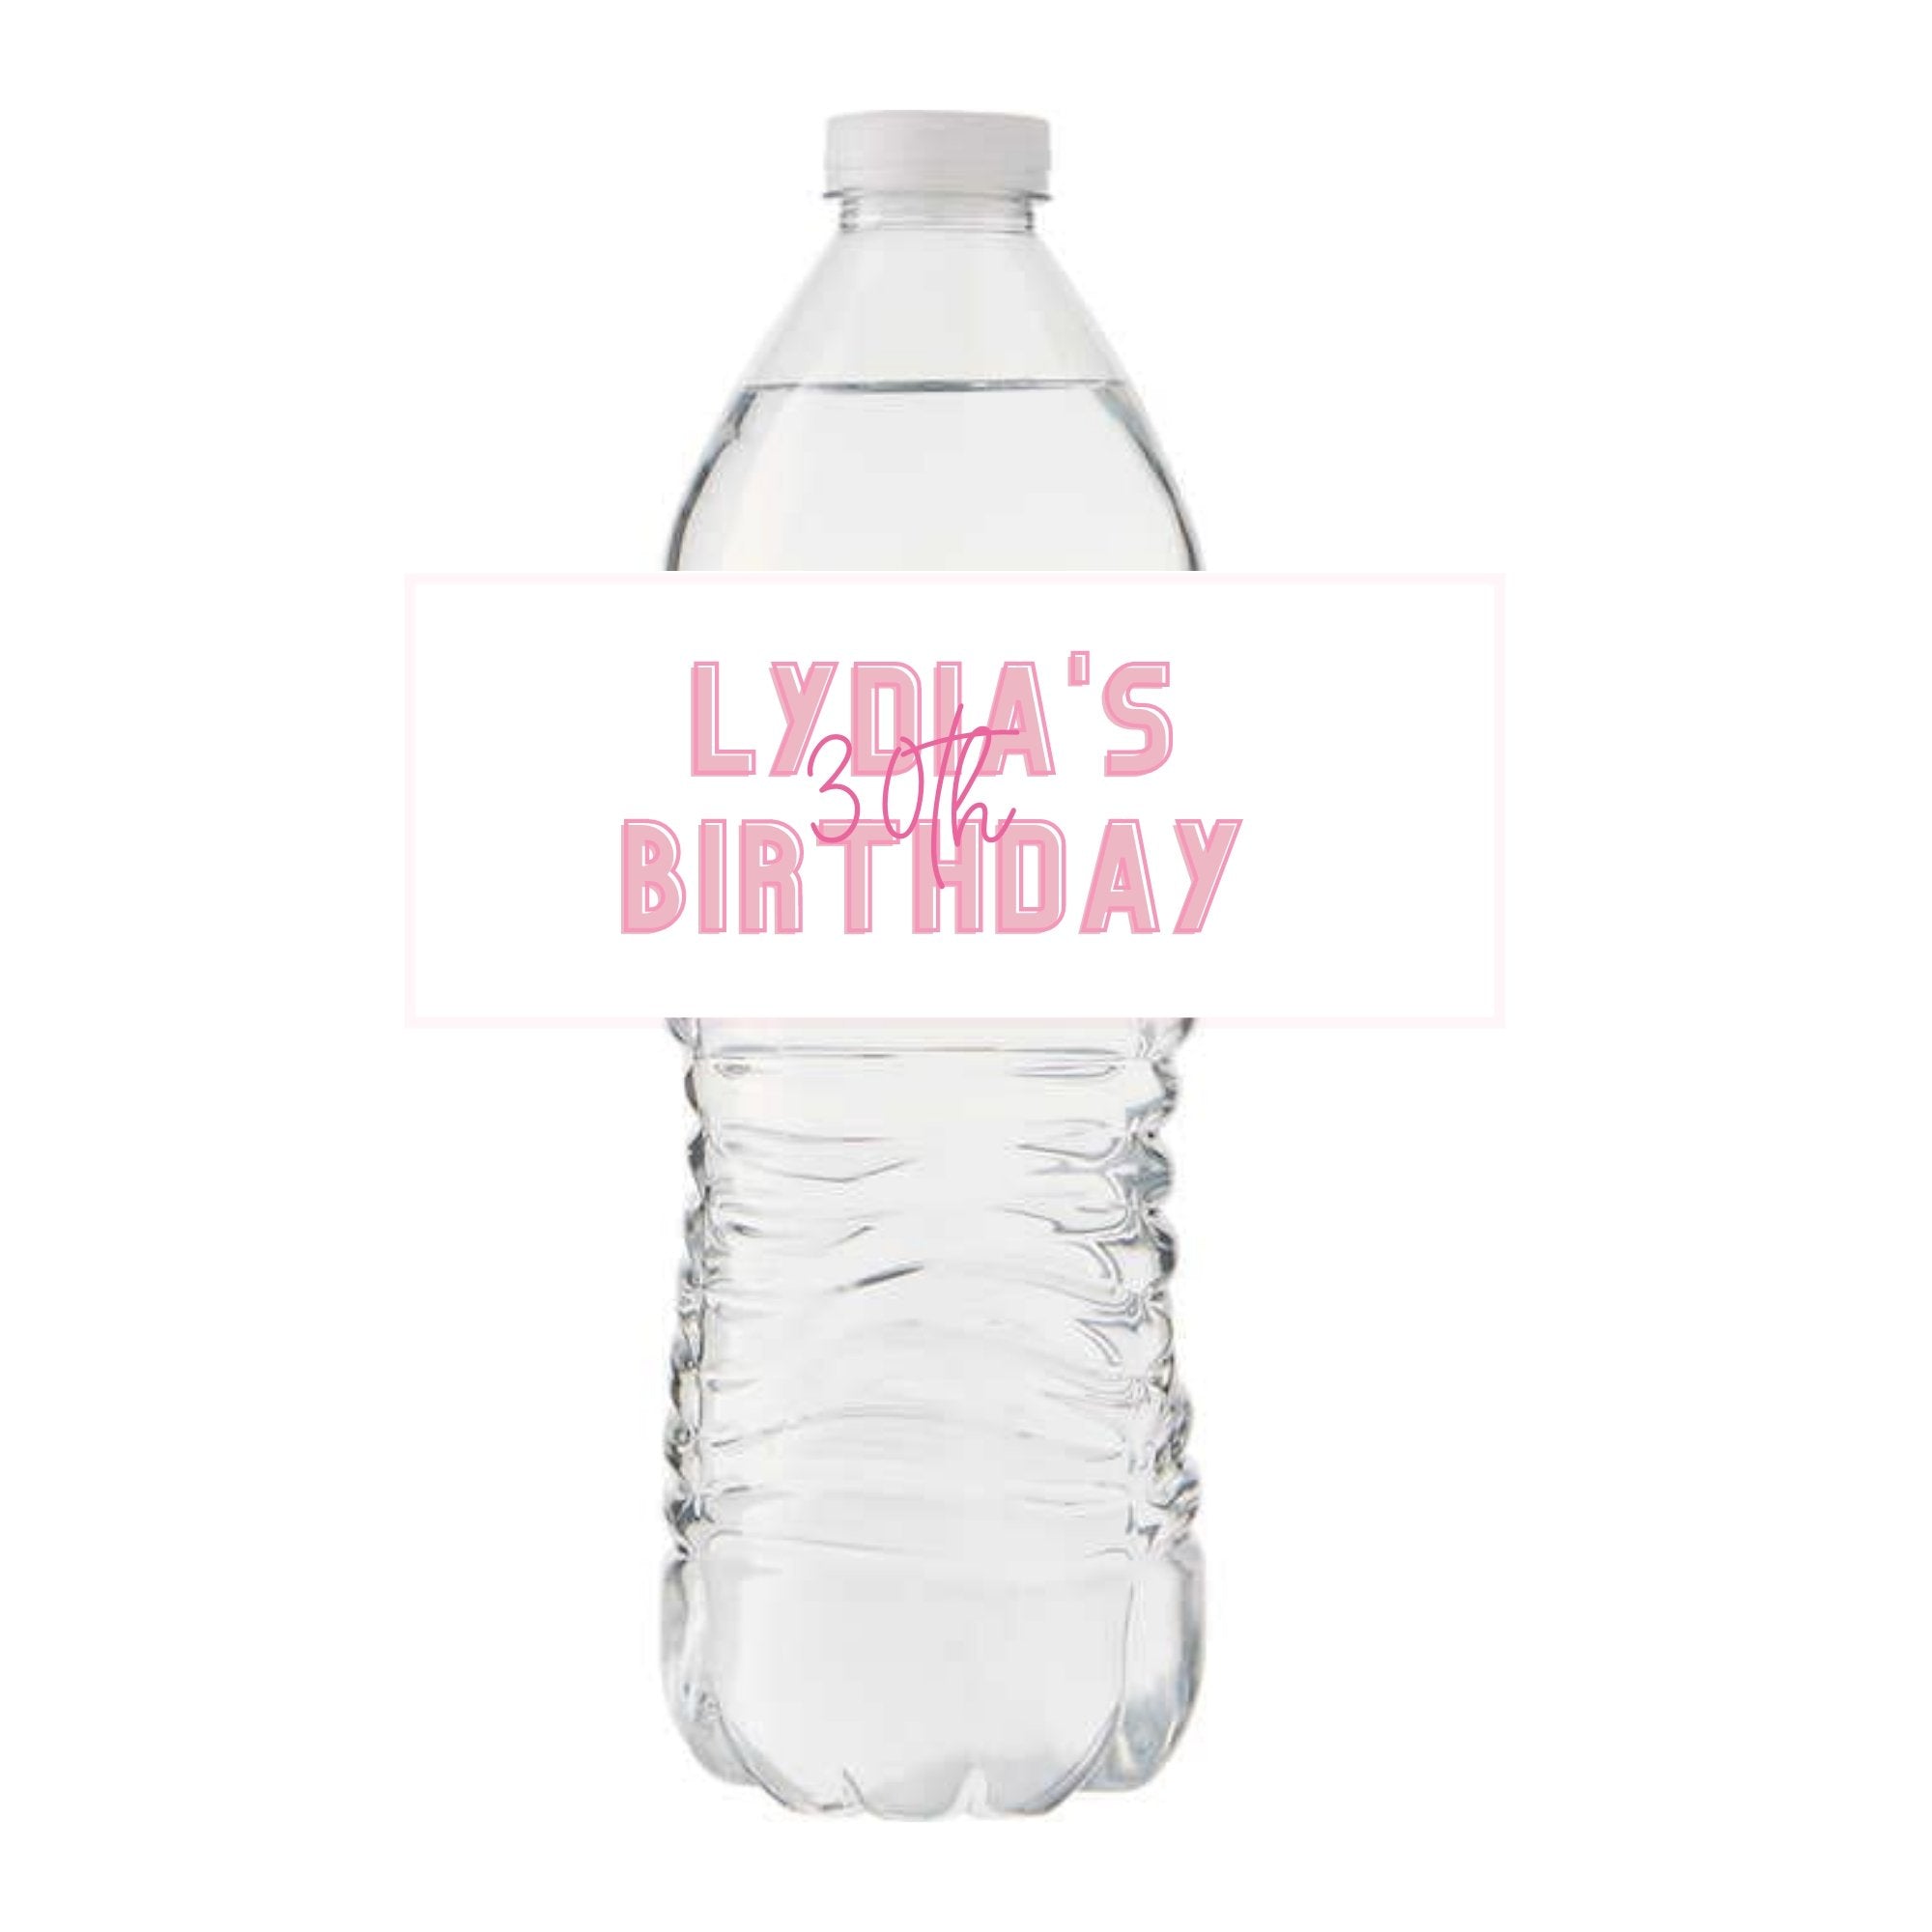 A water bottle label is customized with a personalized birthday logo.